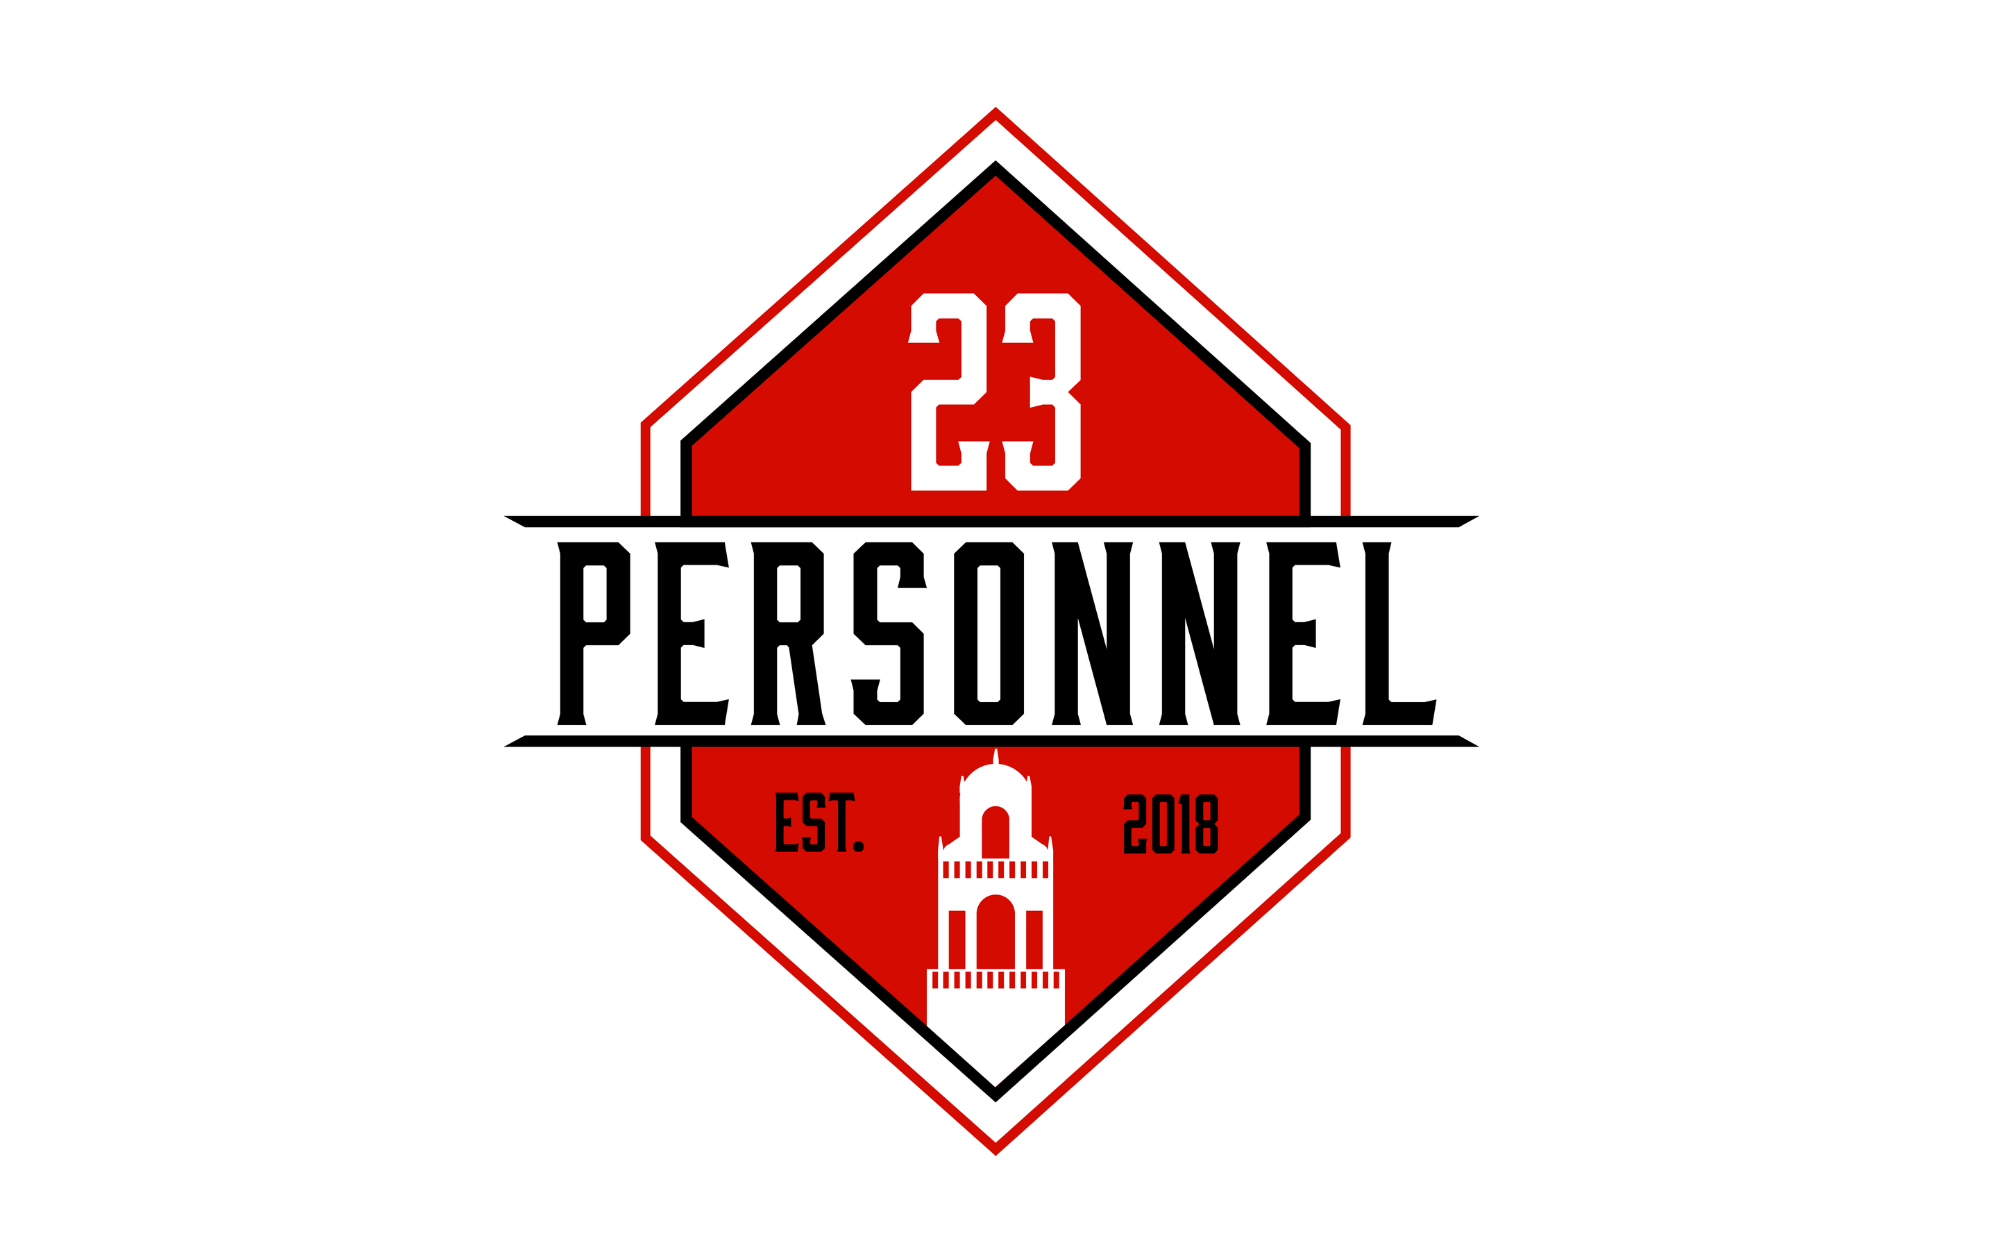 Sonny Cumbie Hired, Oklahoma Instant Reaction  |  23 Personnel Podcast – 183